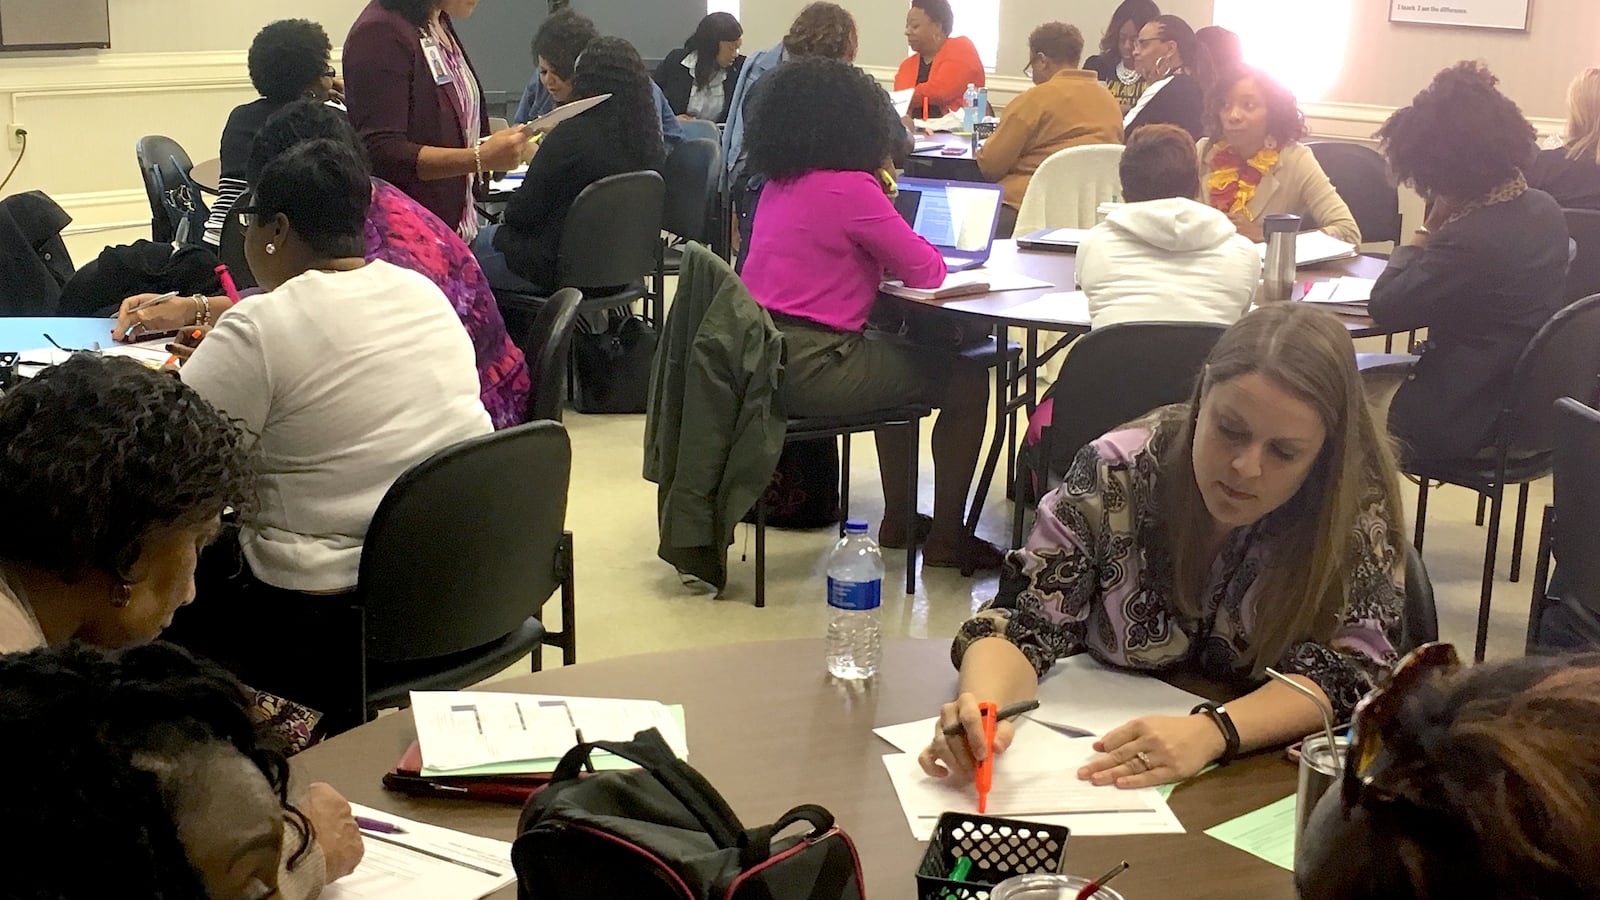 A teacher training last year on Expeditionary Learning, a new curriculum for English language arts introduced in Shelby County Schools in 2017.